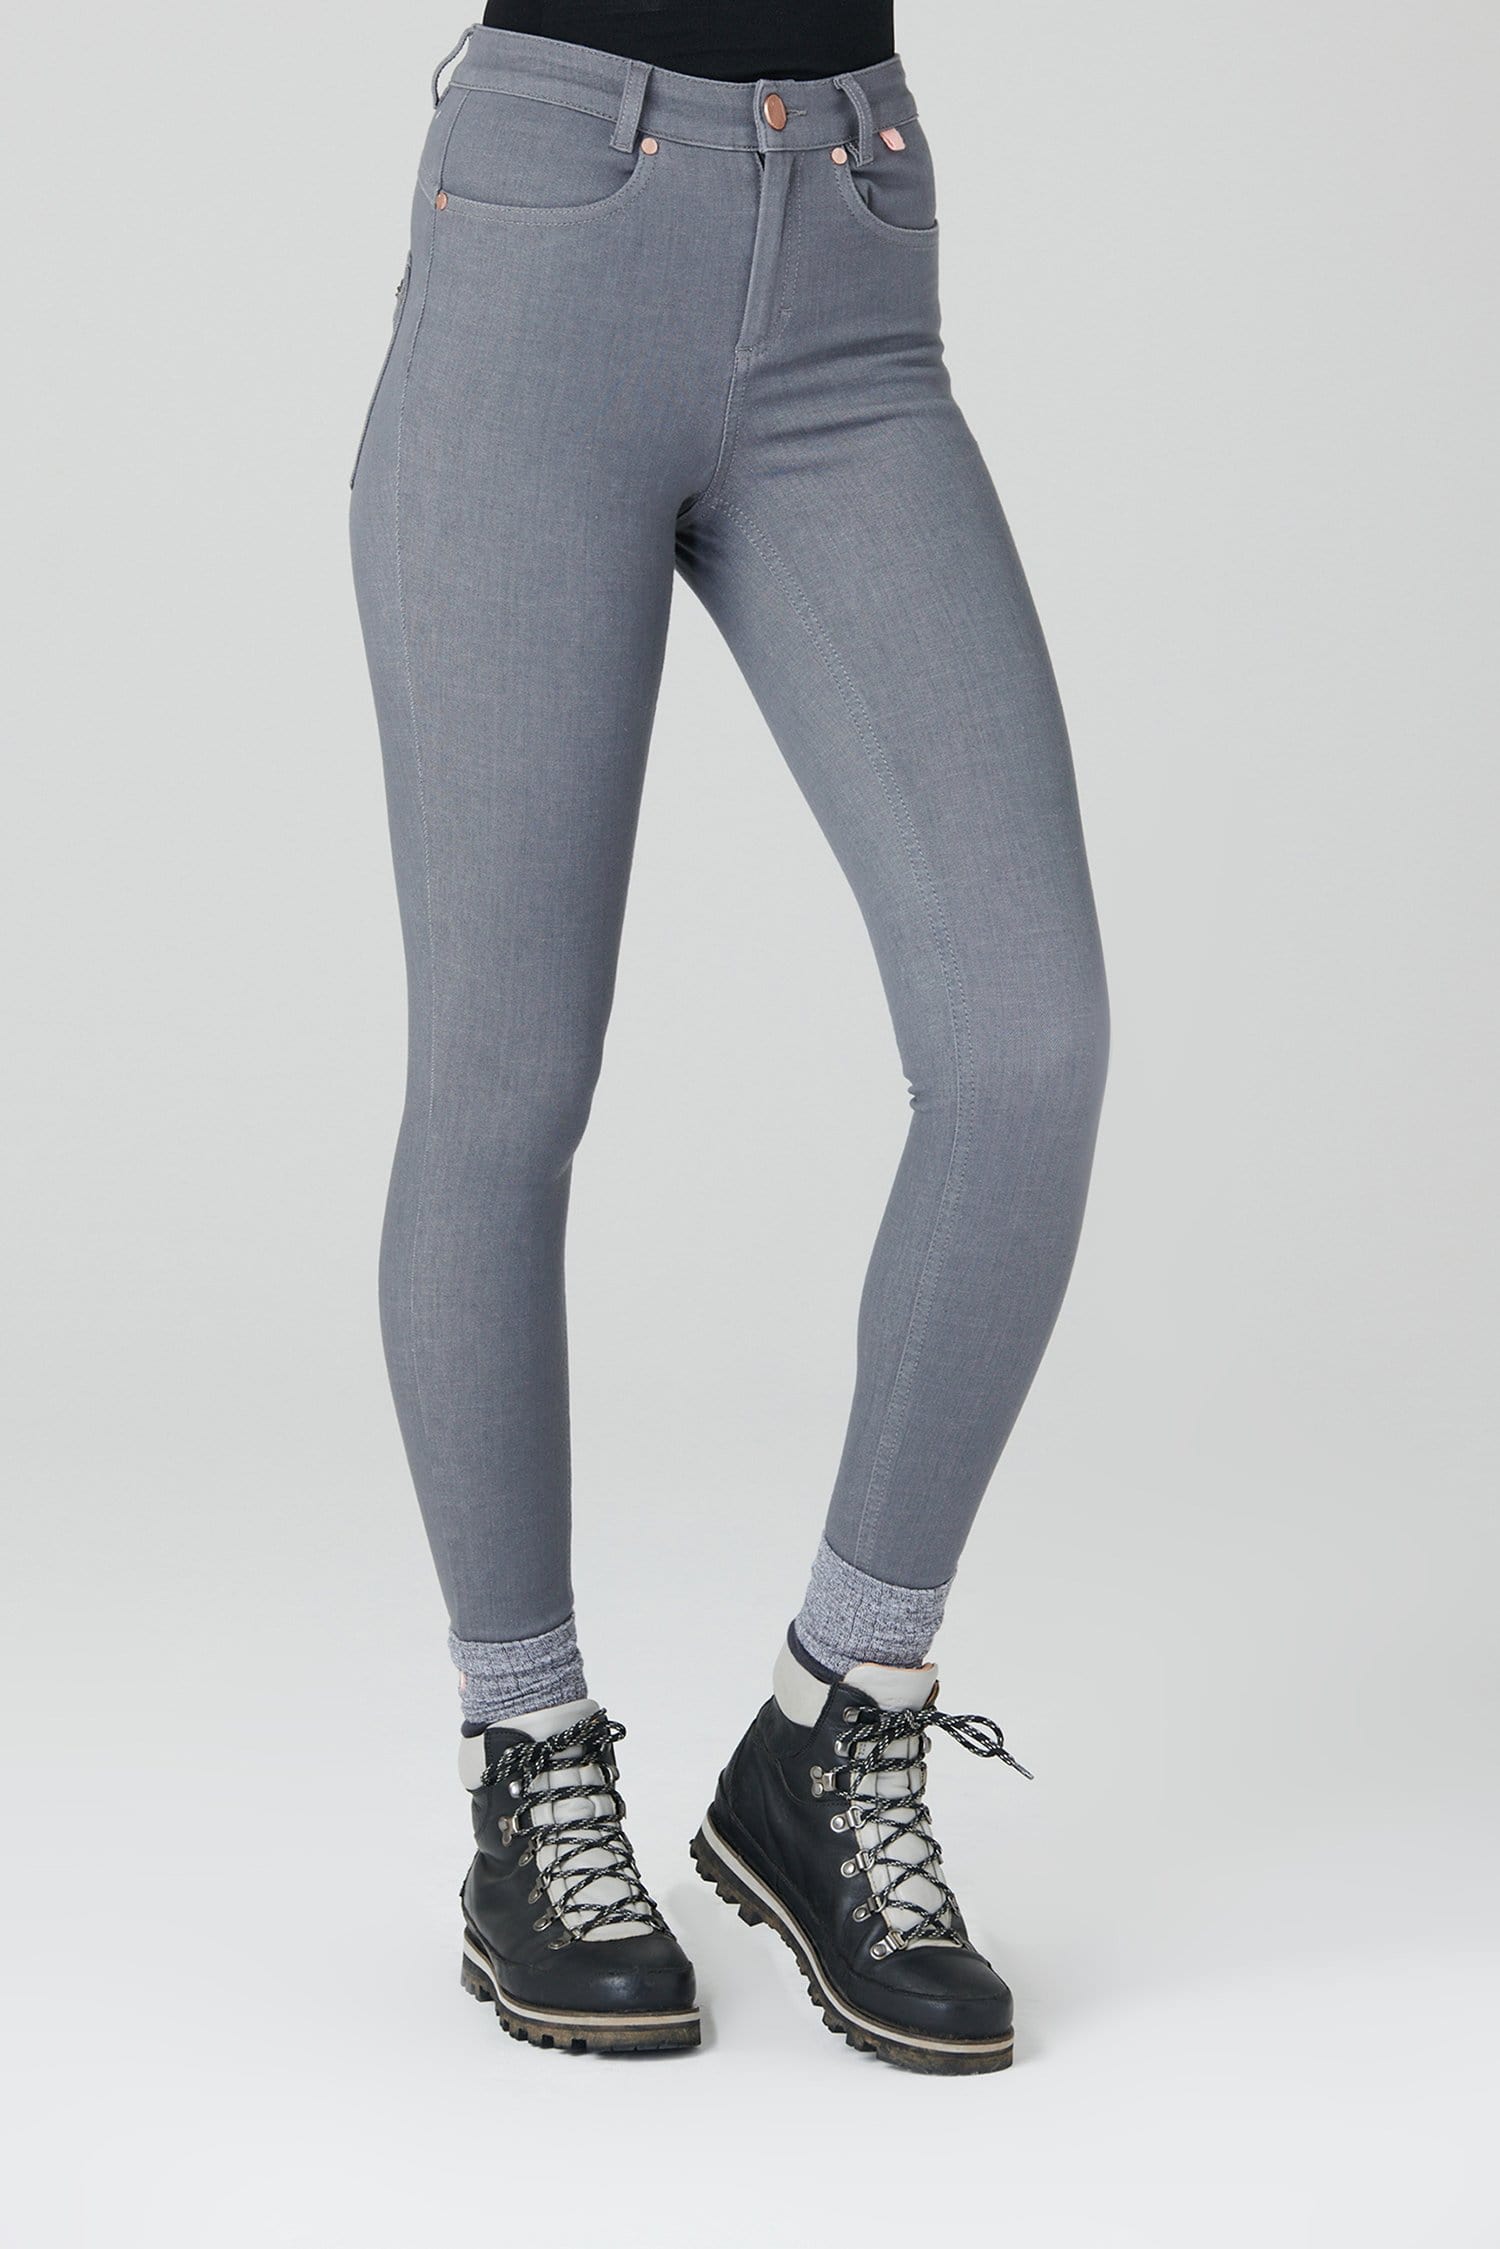 The Skinny Outdoor Jeans - Grey Denim Trousers  